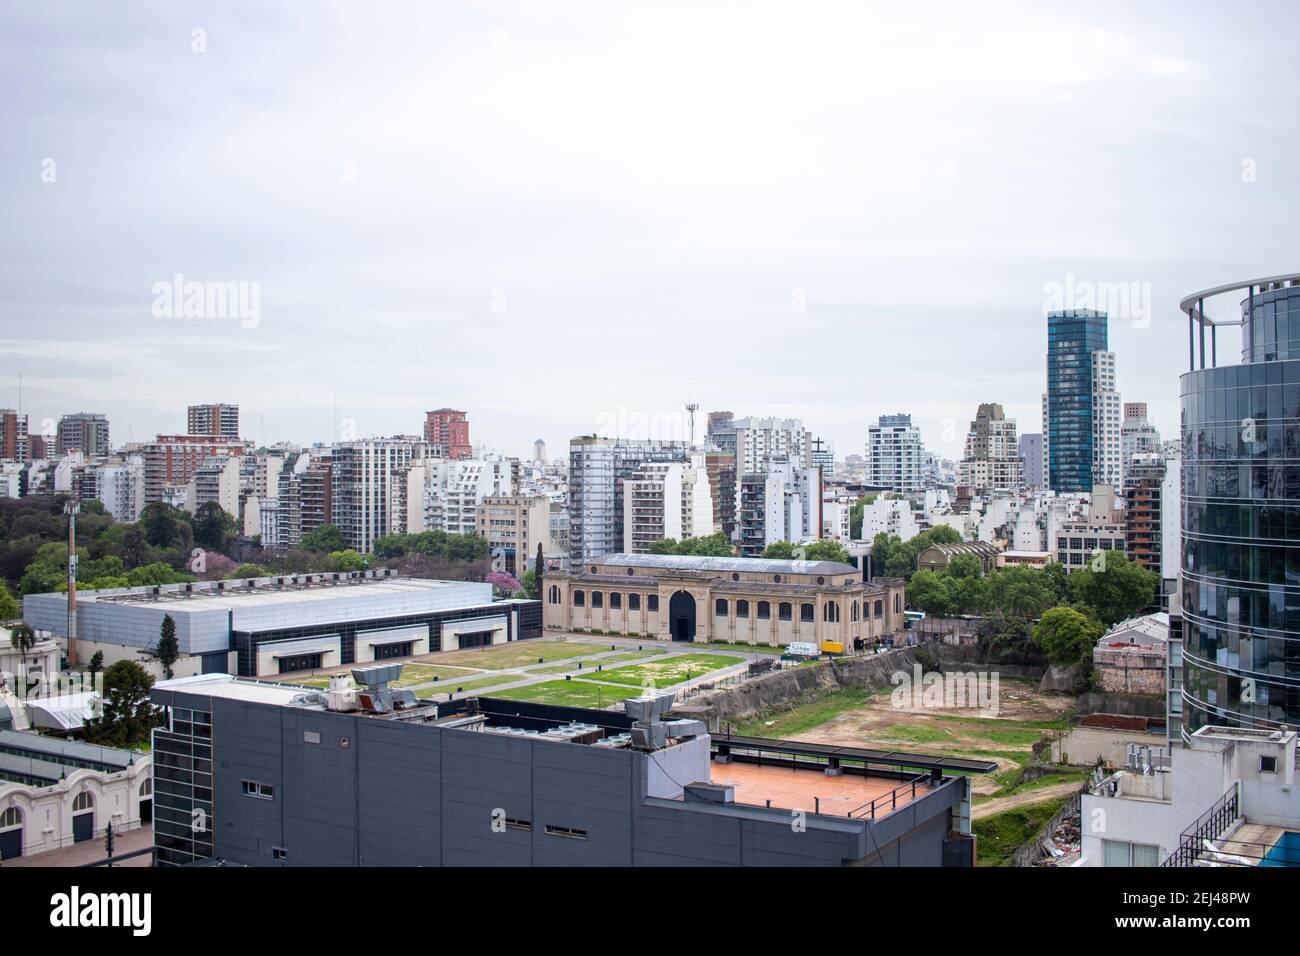 BUENOS AIRES - 15TH OCT 2019: View of the Rural in the Palermo area in the city of Buenos Aires in Argentina Stock Photo